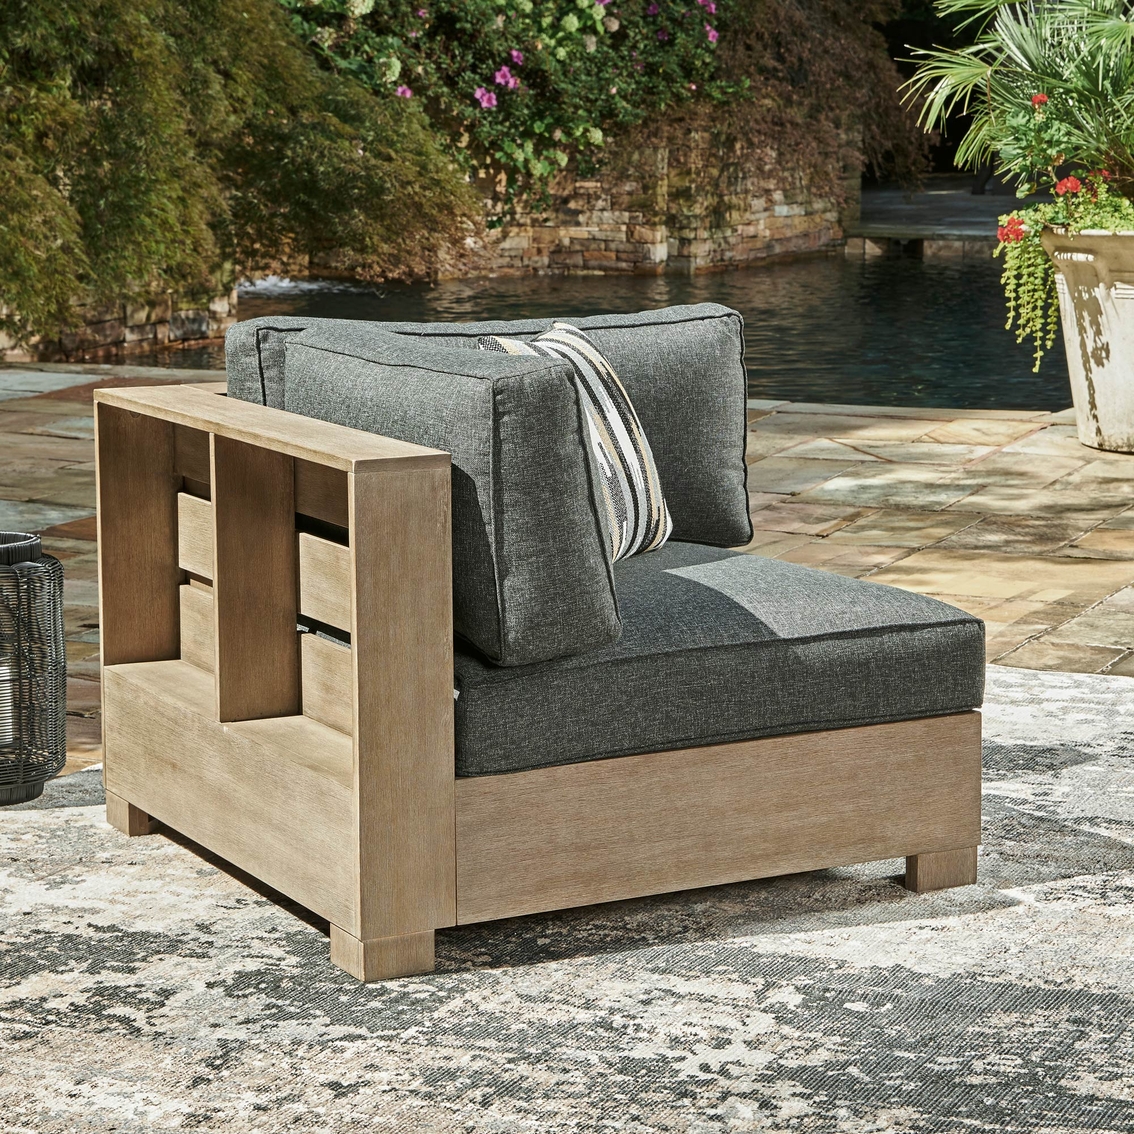 Signature Design by Ashley Citrine Park 6 pc. Outdoor Sectional with Coffee & End - Image 3 of 10